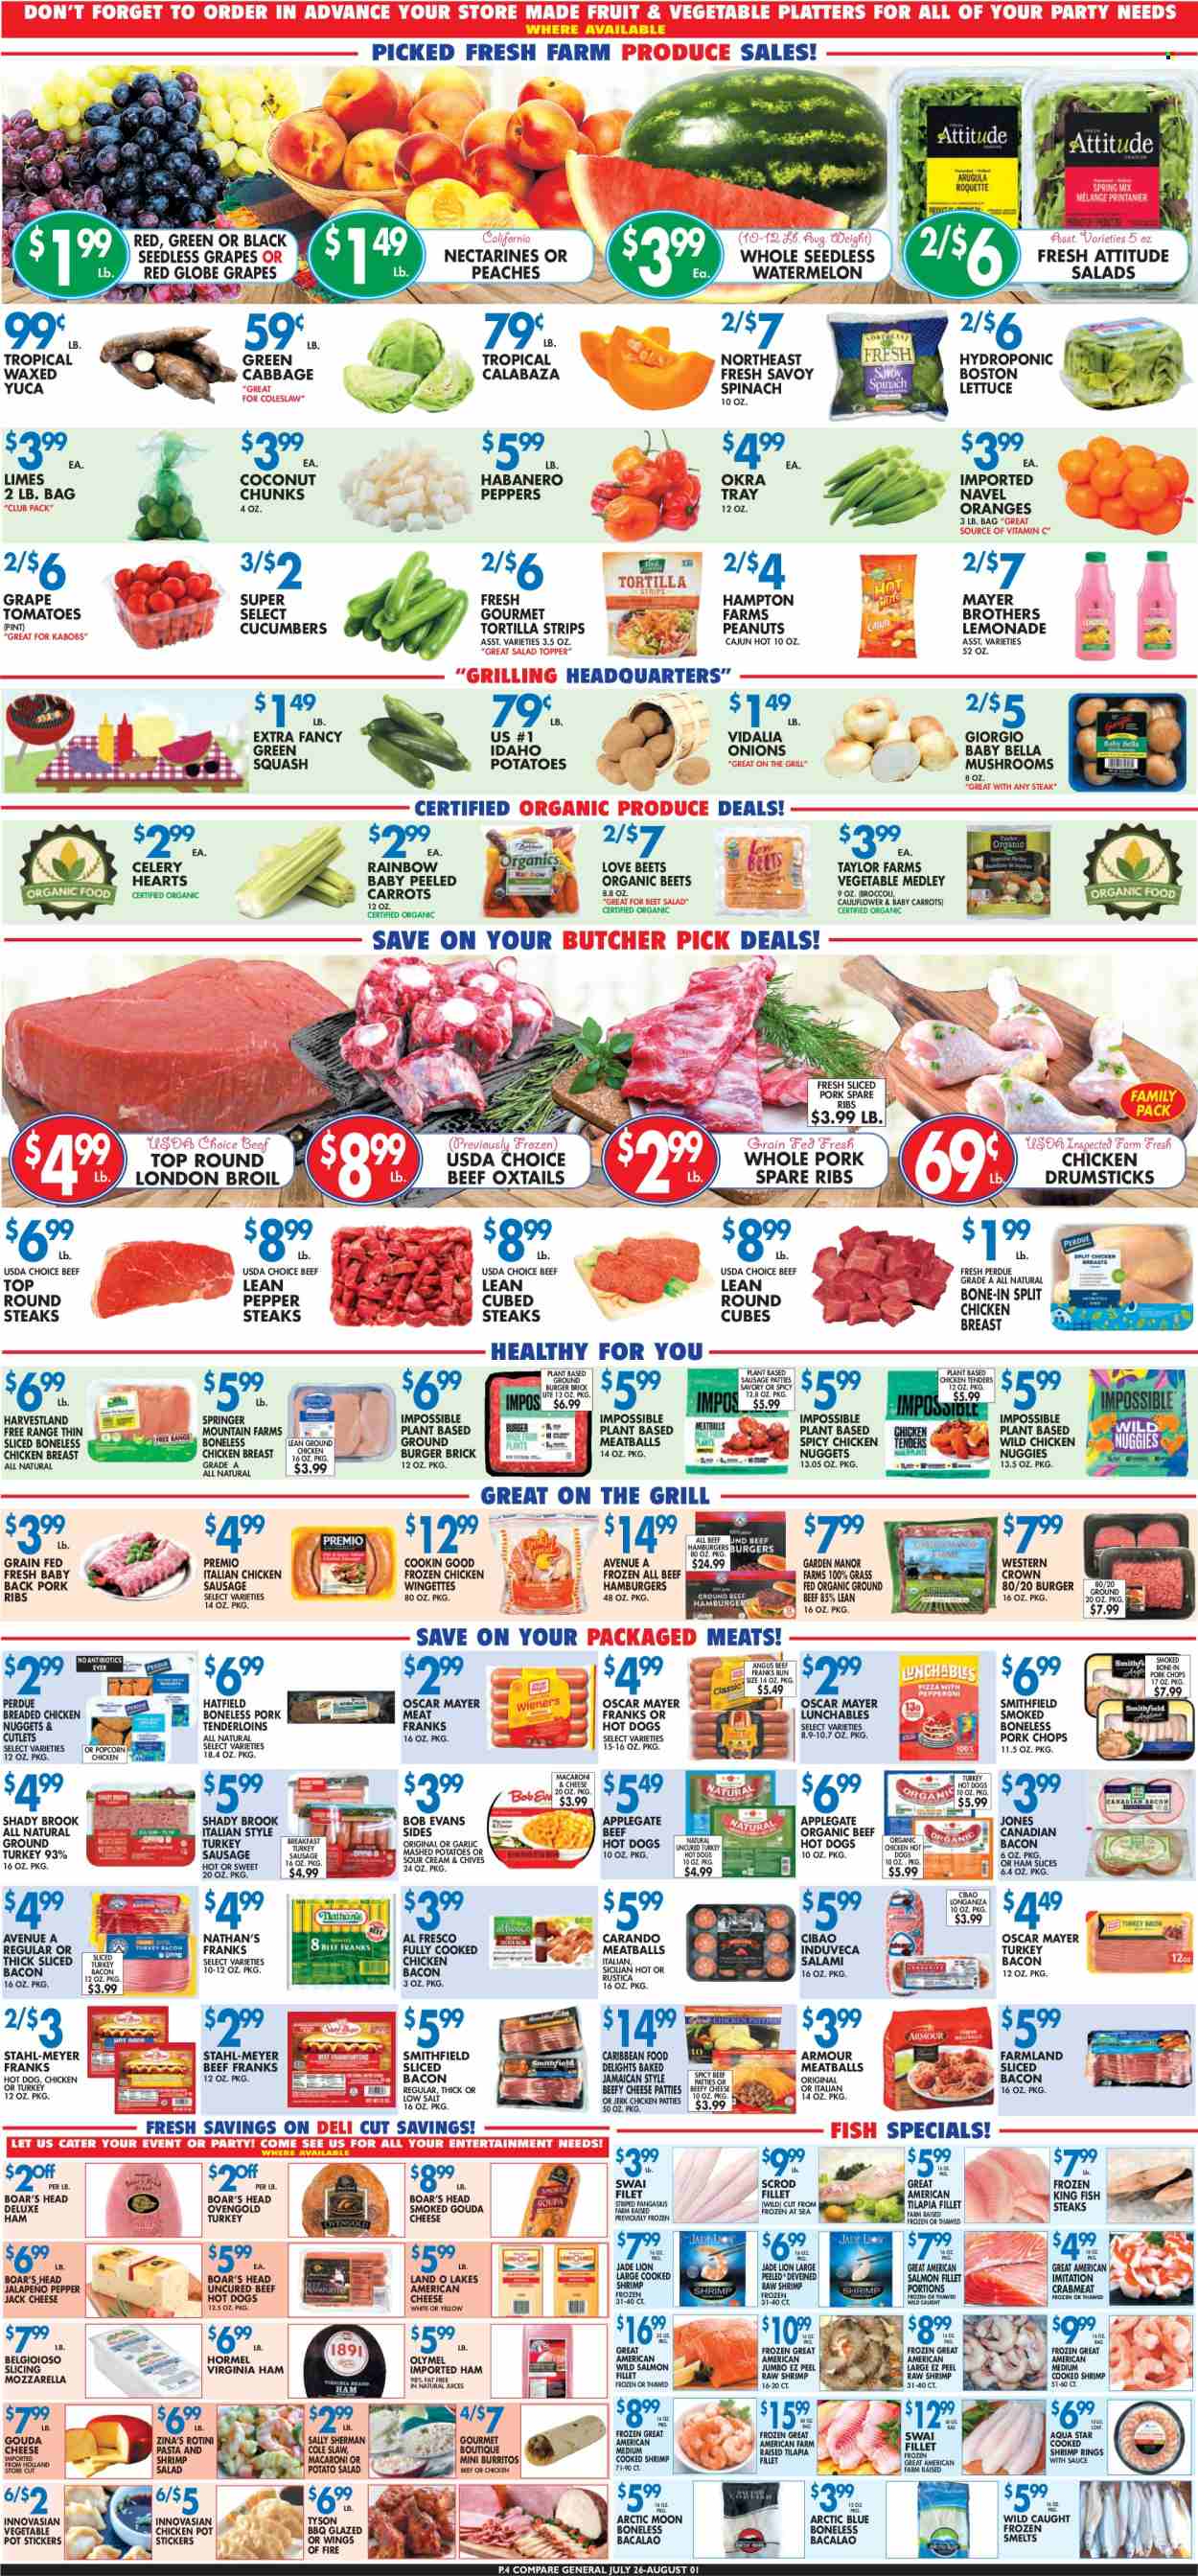 thumbnail - Compare Foods Flyer - 07/26/2024 - 08/01/2024 - Sales products - mushrooms, baby bella mushrooms, broccoli, cabbage, carrots, celery, cucumber, coleslaw, tomatoes, zucchini, okra, salad, peppers, sleeved celery, beetroot, grapes, limes, nectarines, Red Globe, seedless grapes, oranges, peaches, fish fillets, salmon, salmon fillet, tilapia, whitefish, pangasius, seafood, fish, king fish, shrimps, fish steak, swai fillet, crab sticks, mac and cheese, mashed potatoes, hot dog, chicken tenders, meatballs, snack, nuggets, hamburger, pasta, chicken nuggets, chicken bites, burrito, Perdue®, Lunchables, Bob Evans, burger patties, Hormel, Boar's Head, ready meal, plant based ready meal, breaded chicken, plant based product, kabobs, bacon, canadian bacon, salami, sliced turkey, turkey bacon, ham, chicken breasts, virginia ham, Oscar Mayer, turkey ham, chicken sausage, frankfurters, turkey sausage, potato salad, smoked pork, Pepper Jack cheese, cheese, chicken patties, tortilla chips, peanuts, lemonade, juice, BROTHERS, chicken drumsticks, beef meat, beef steak, oxtail, steak, sausage patties, pork chops, pork meat, pork ribs, pork tenderloin, pork spare ribs, pork back ribs, vitamin c, navel oranges. Page 4.